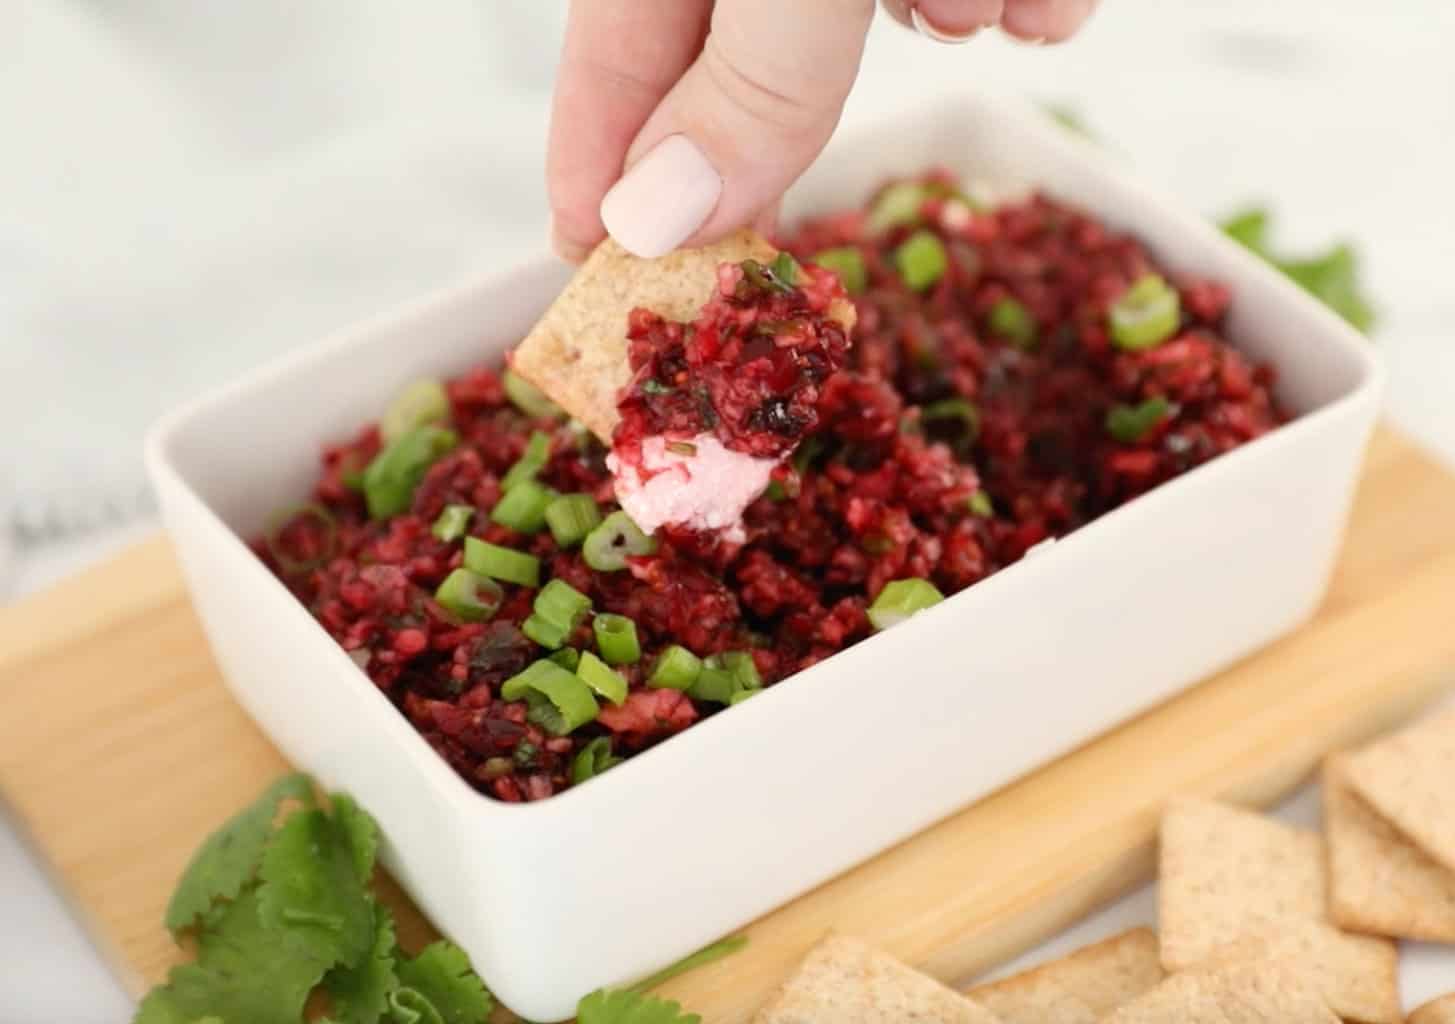 Cranberry Jalapeño Dip with cream cheese in a white dish with a hand lifting a cracker with a scoop of dip on it out of the dish.